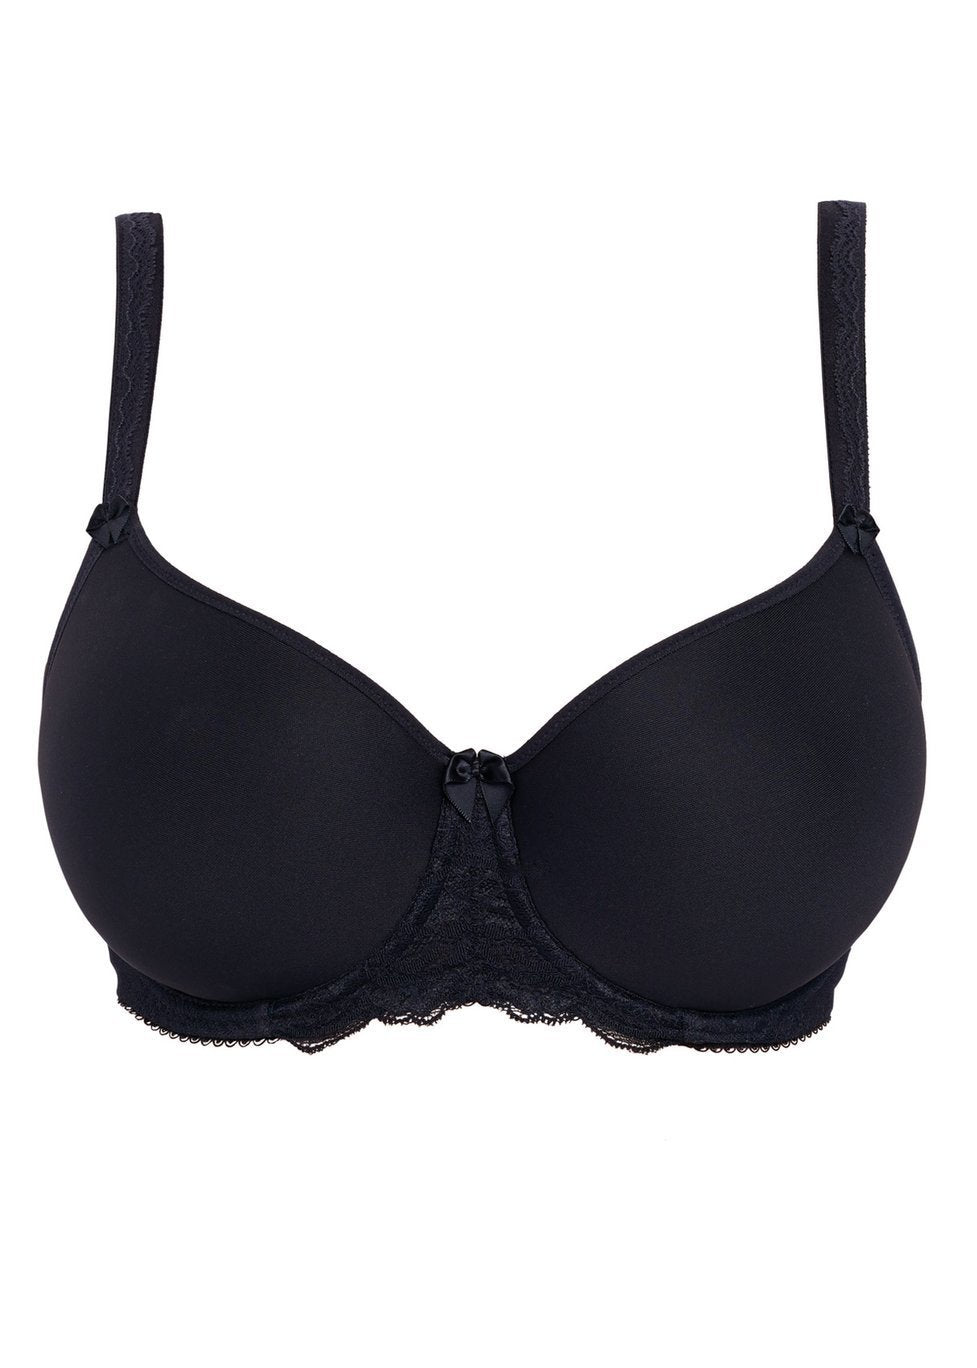 FANTASIE REBECCA LACE FULL CUP SPACER T-SHIRT BRA – Tops & Bottoms